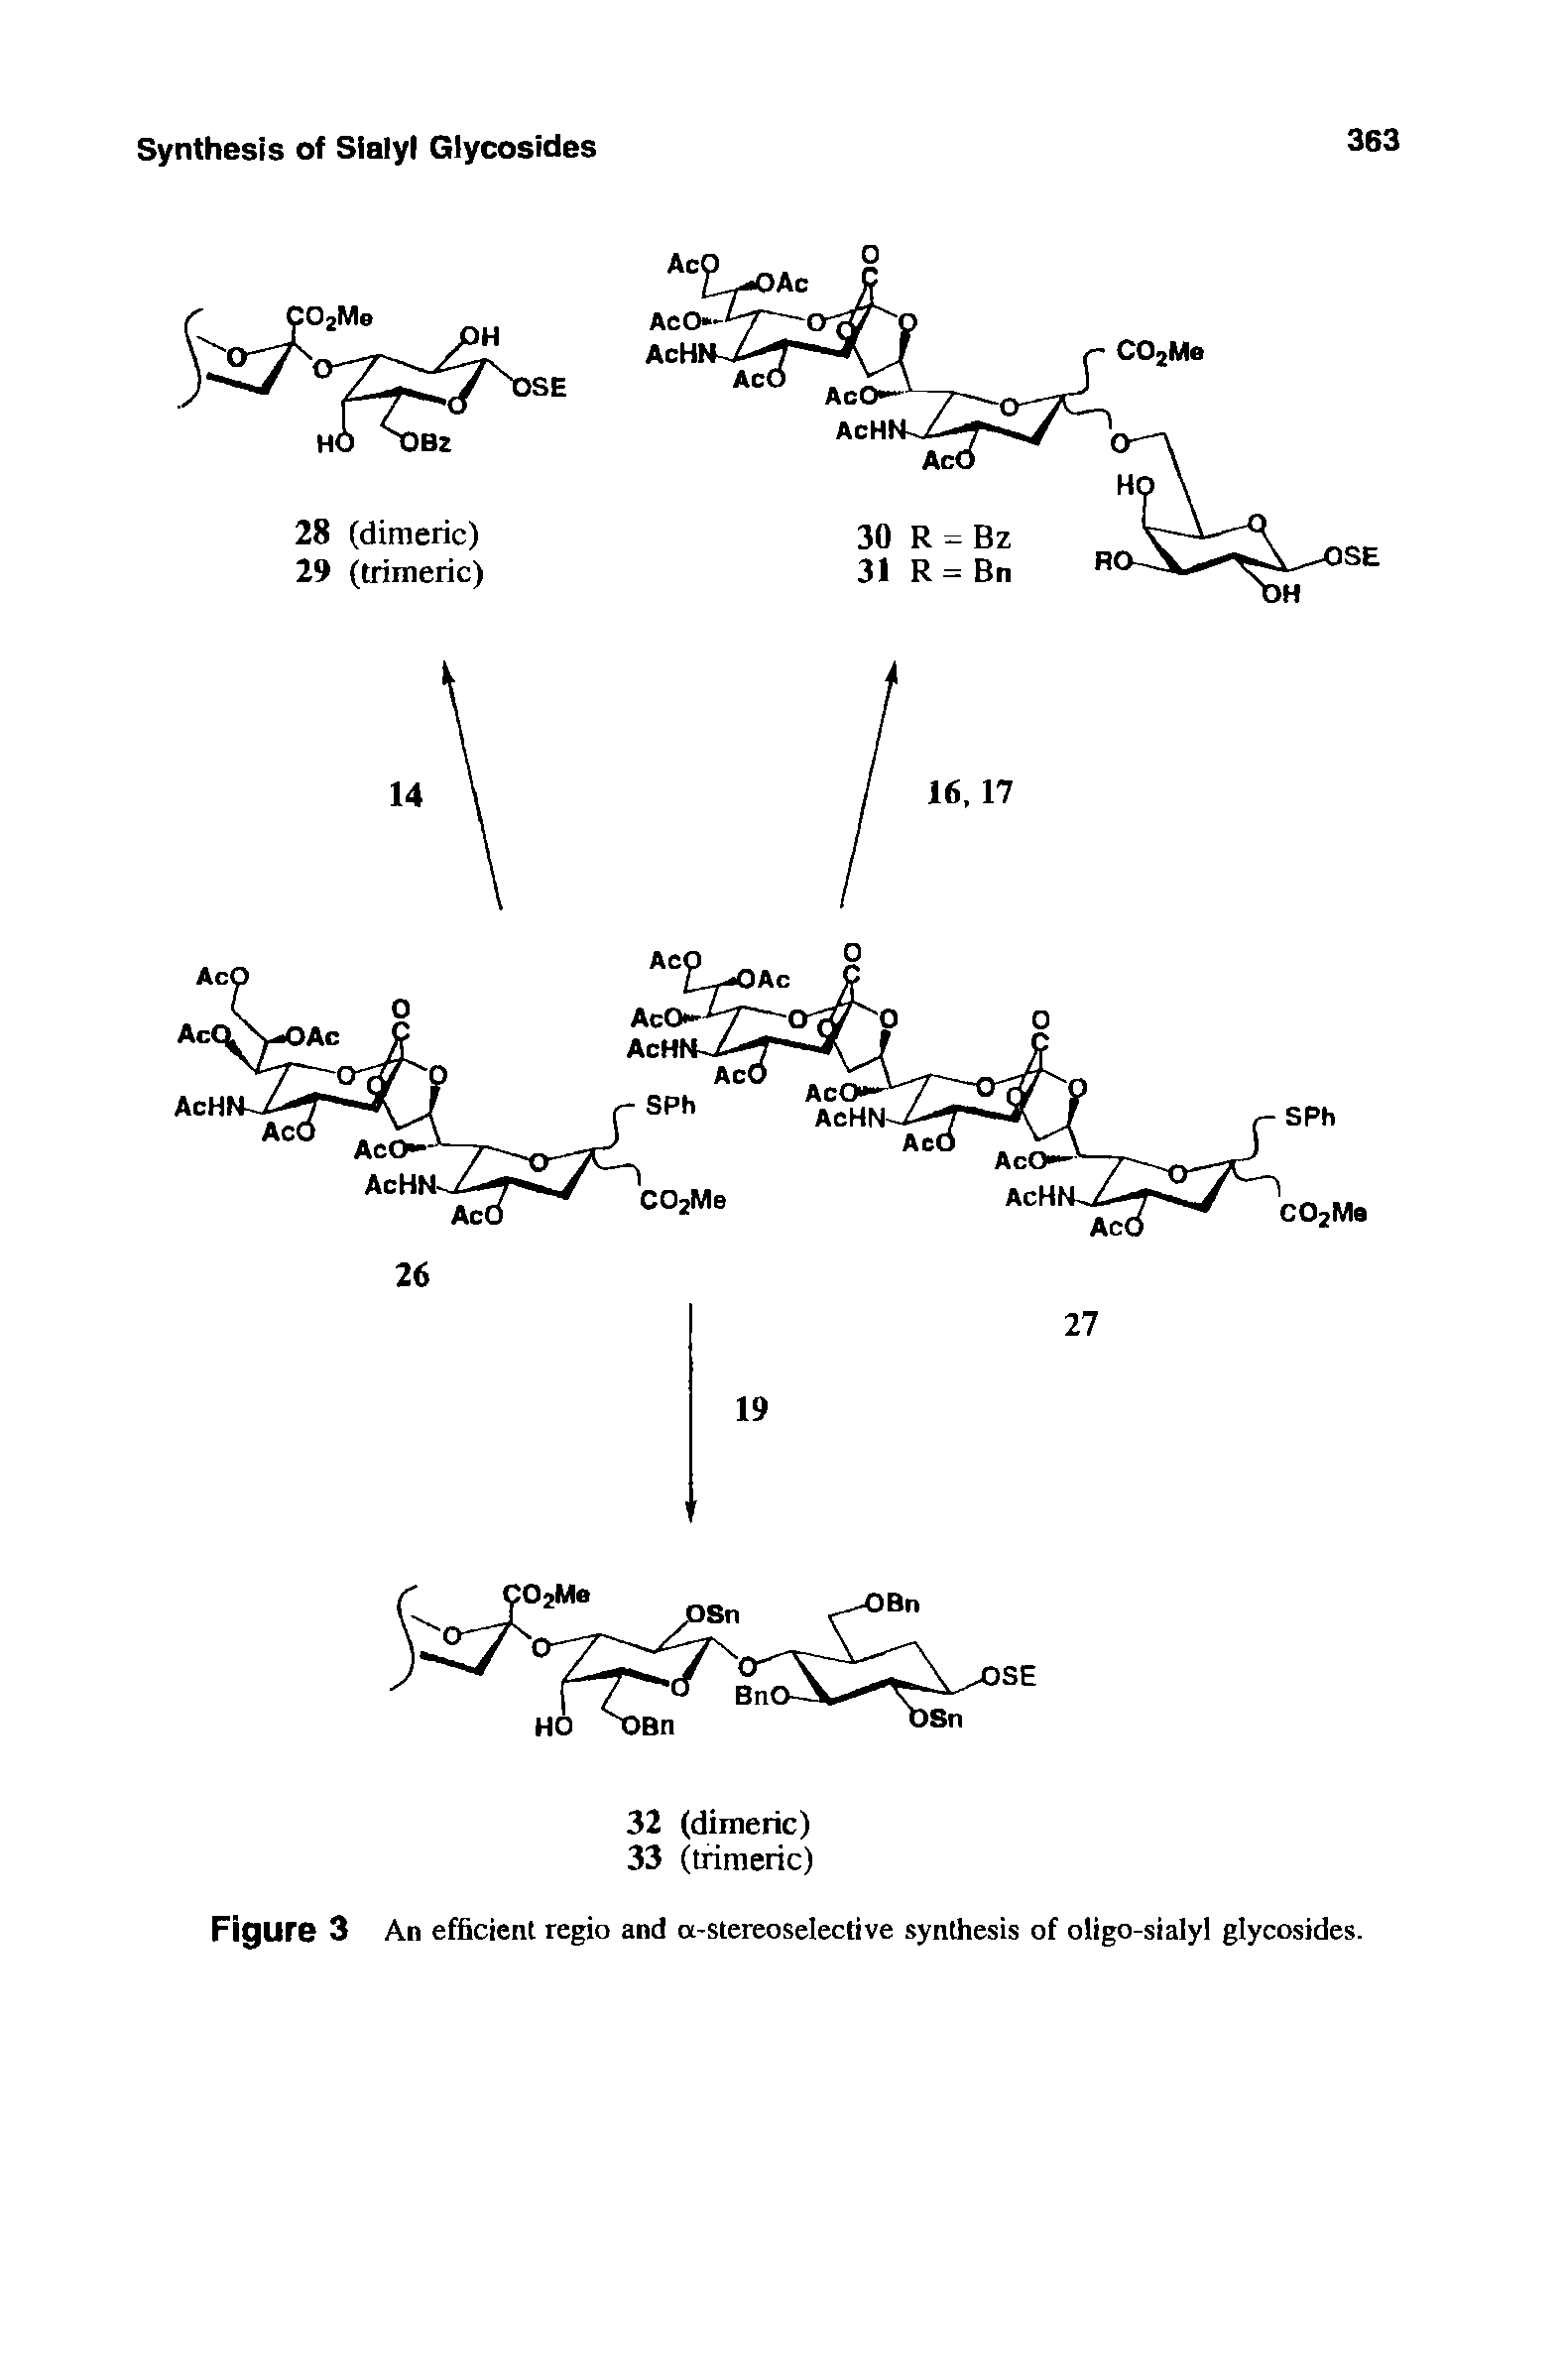 Figure 3 An efficient regio and a-stereoselective synthesis of oligo-sialyl glycosides.